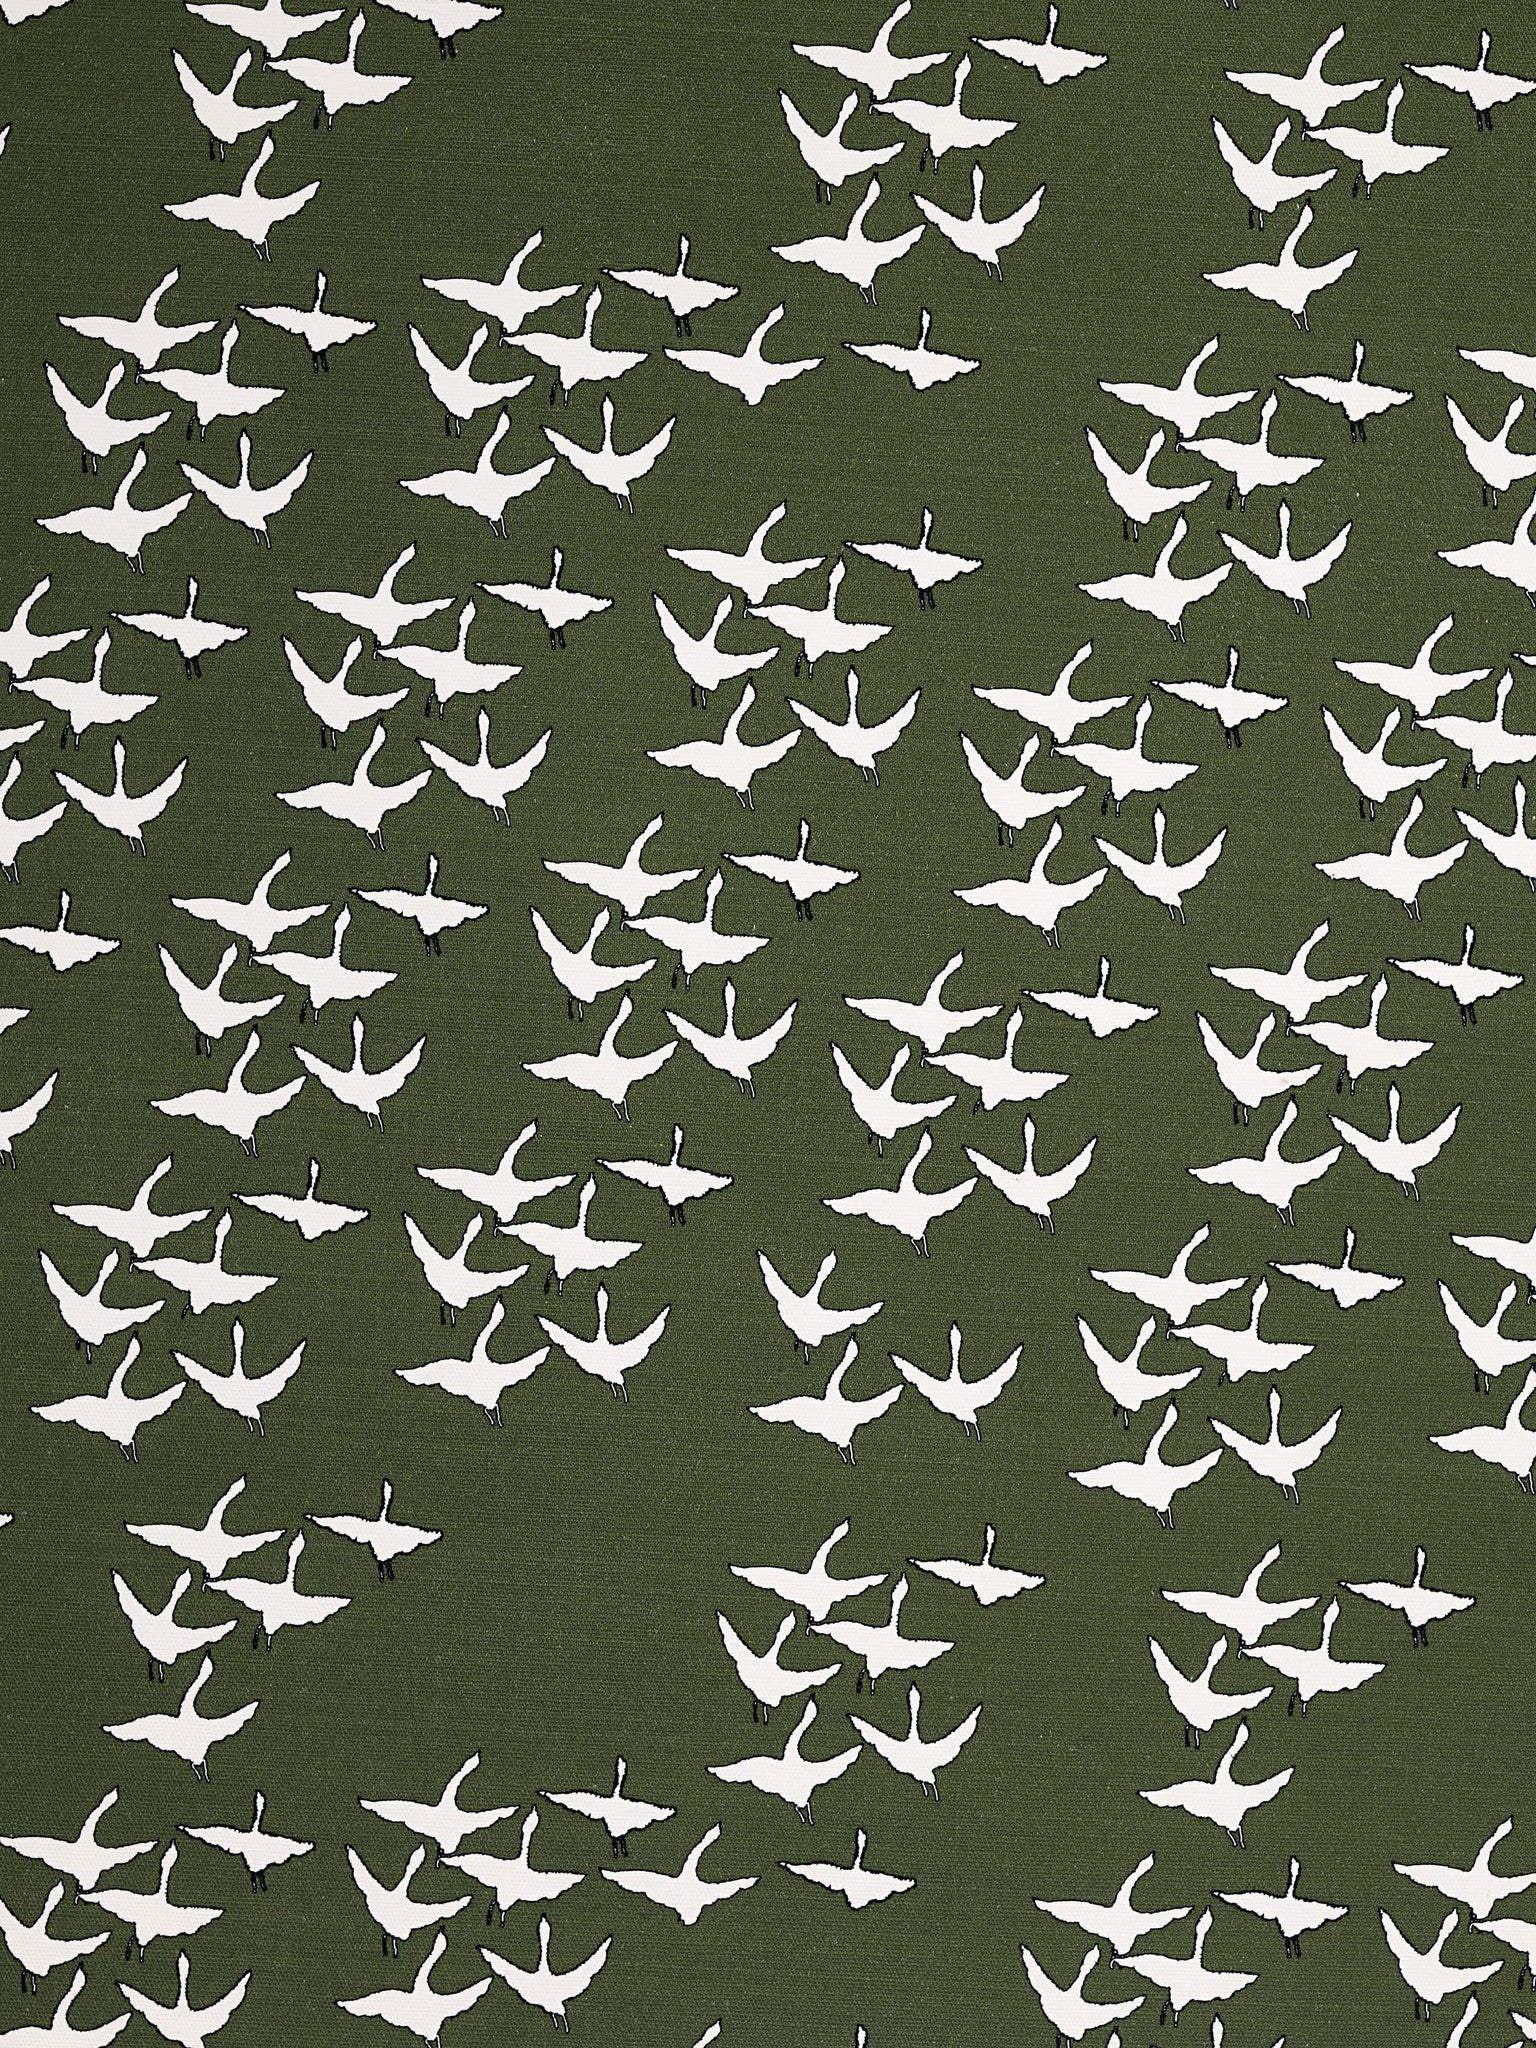 Geese Bird Pattern Cotton Linen Fabric by the Meter in Olive Green